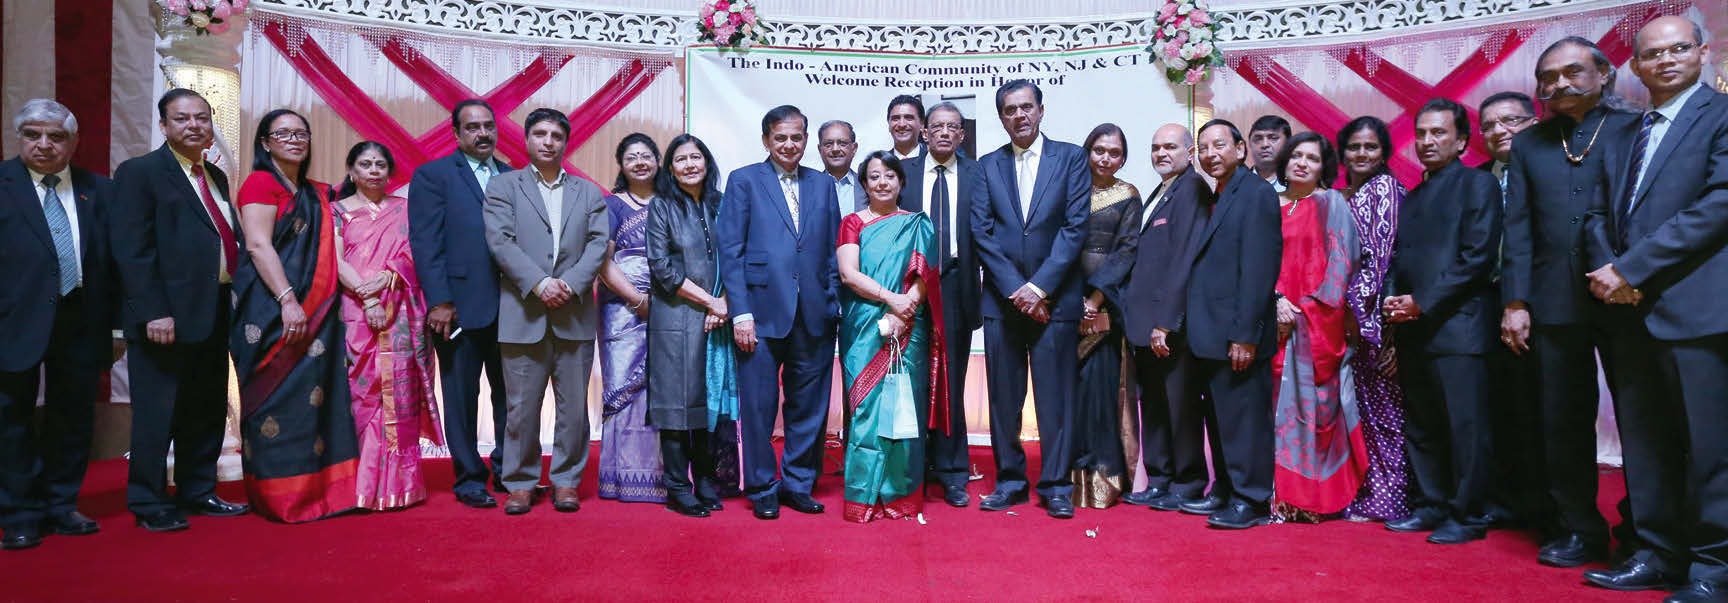 Ambassador Riva Ganguly Das with Representatives of Social and Cultural Organizations of Indian Americans at the reception, March 13